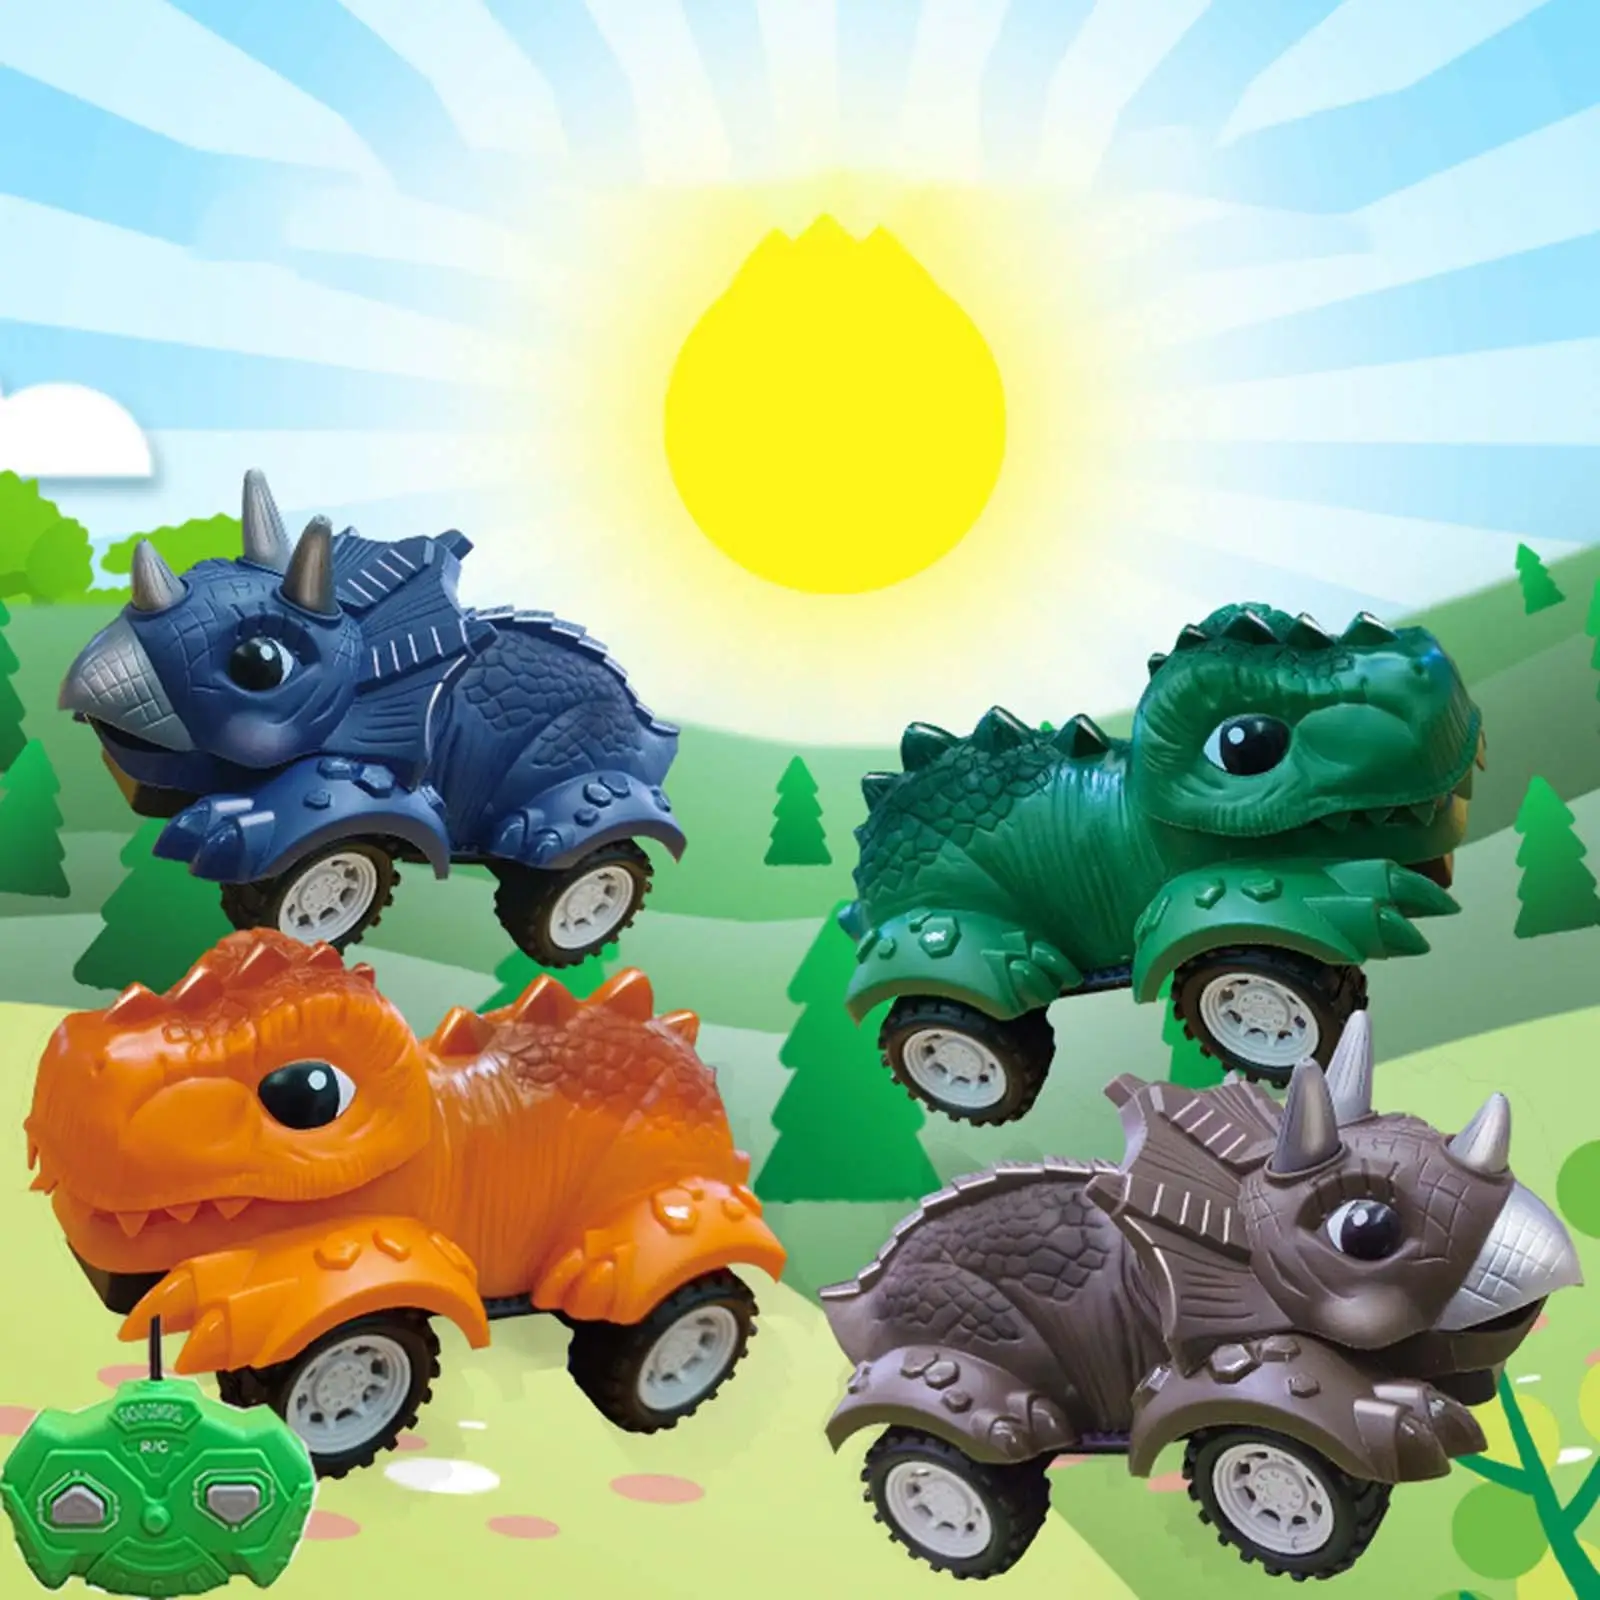 Creative Dinosaur Toy Car DIY Disassembly Battery Operated RC Race car Car for Christmas Gifts Children Boys 3-5